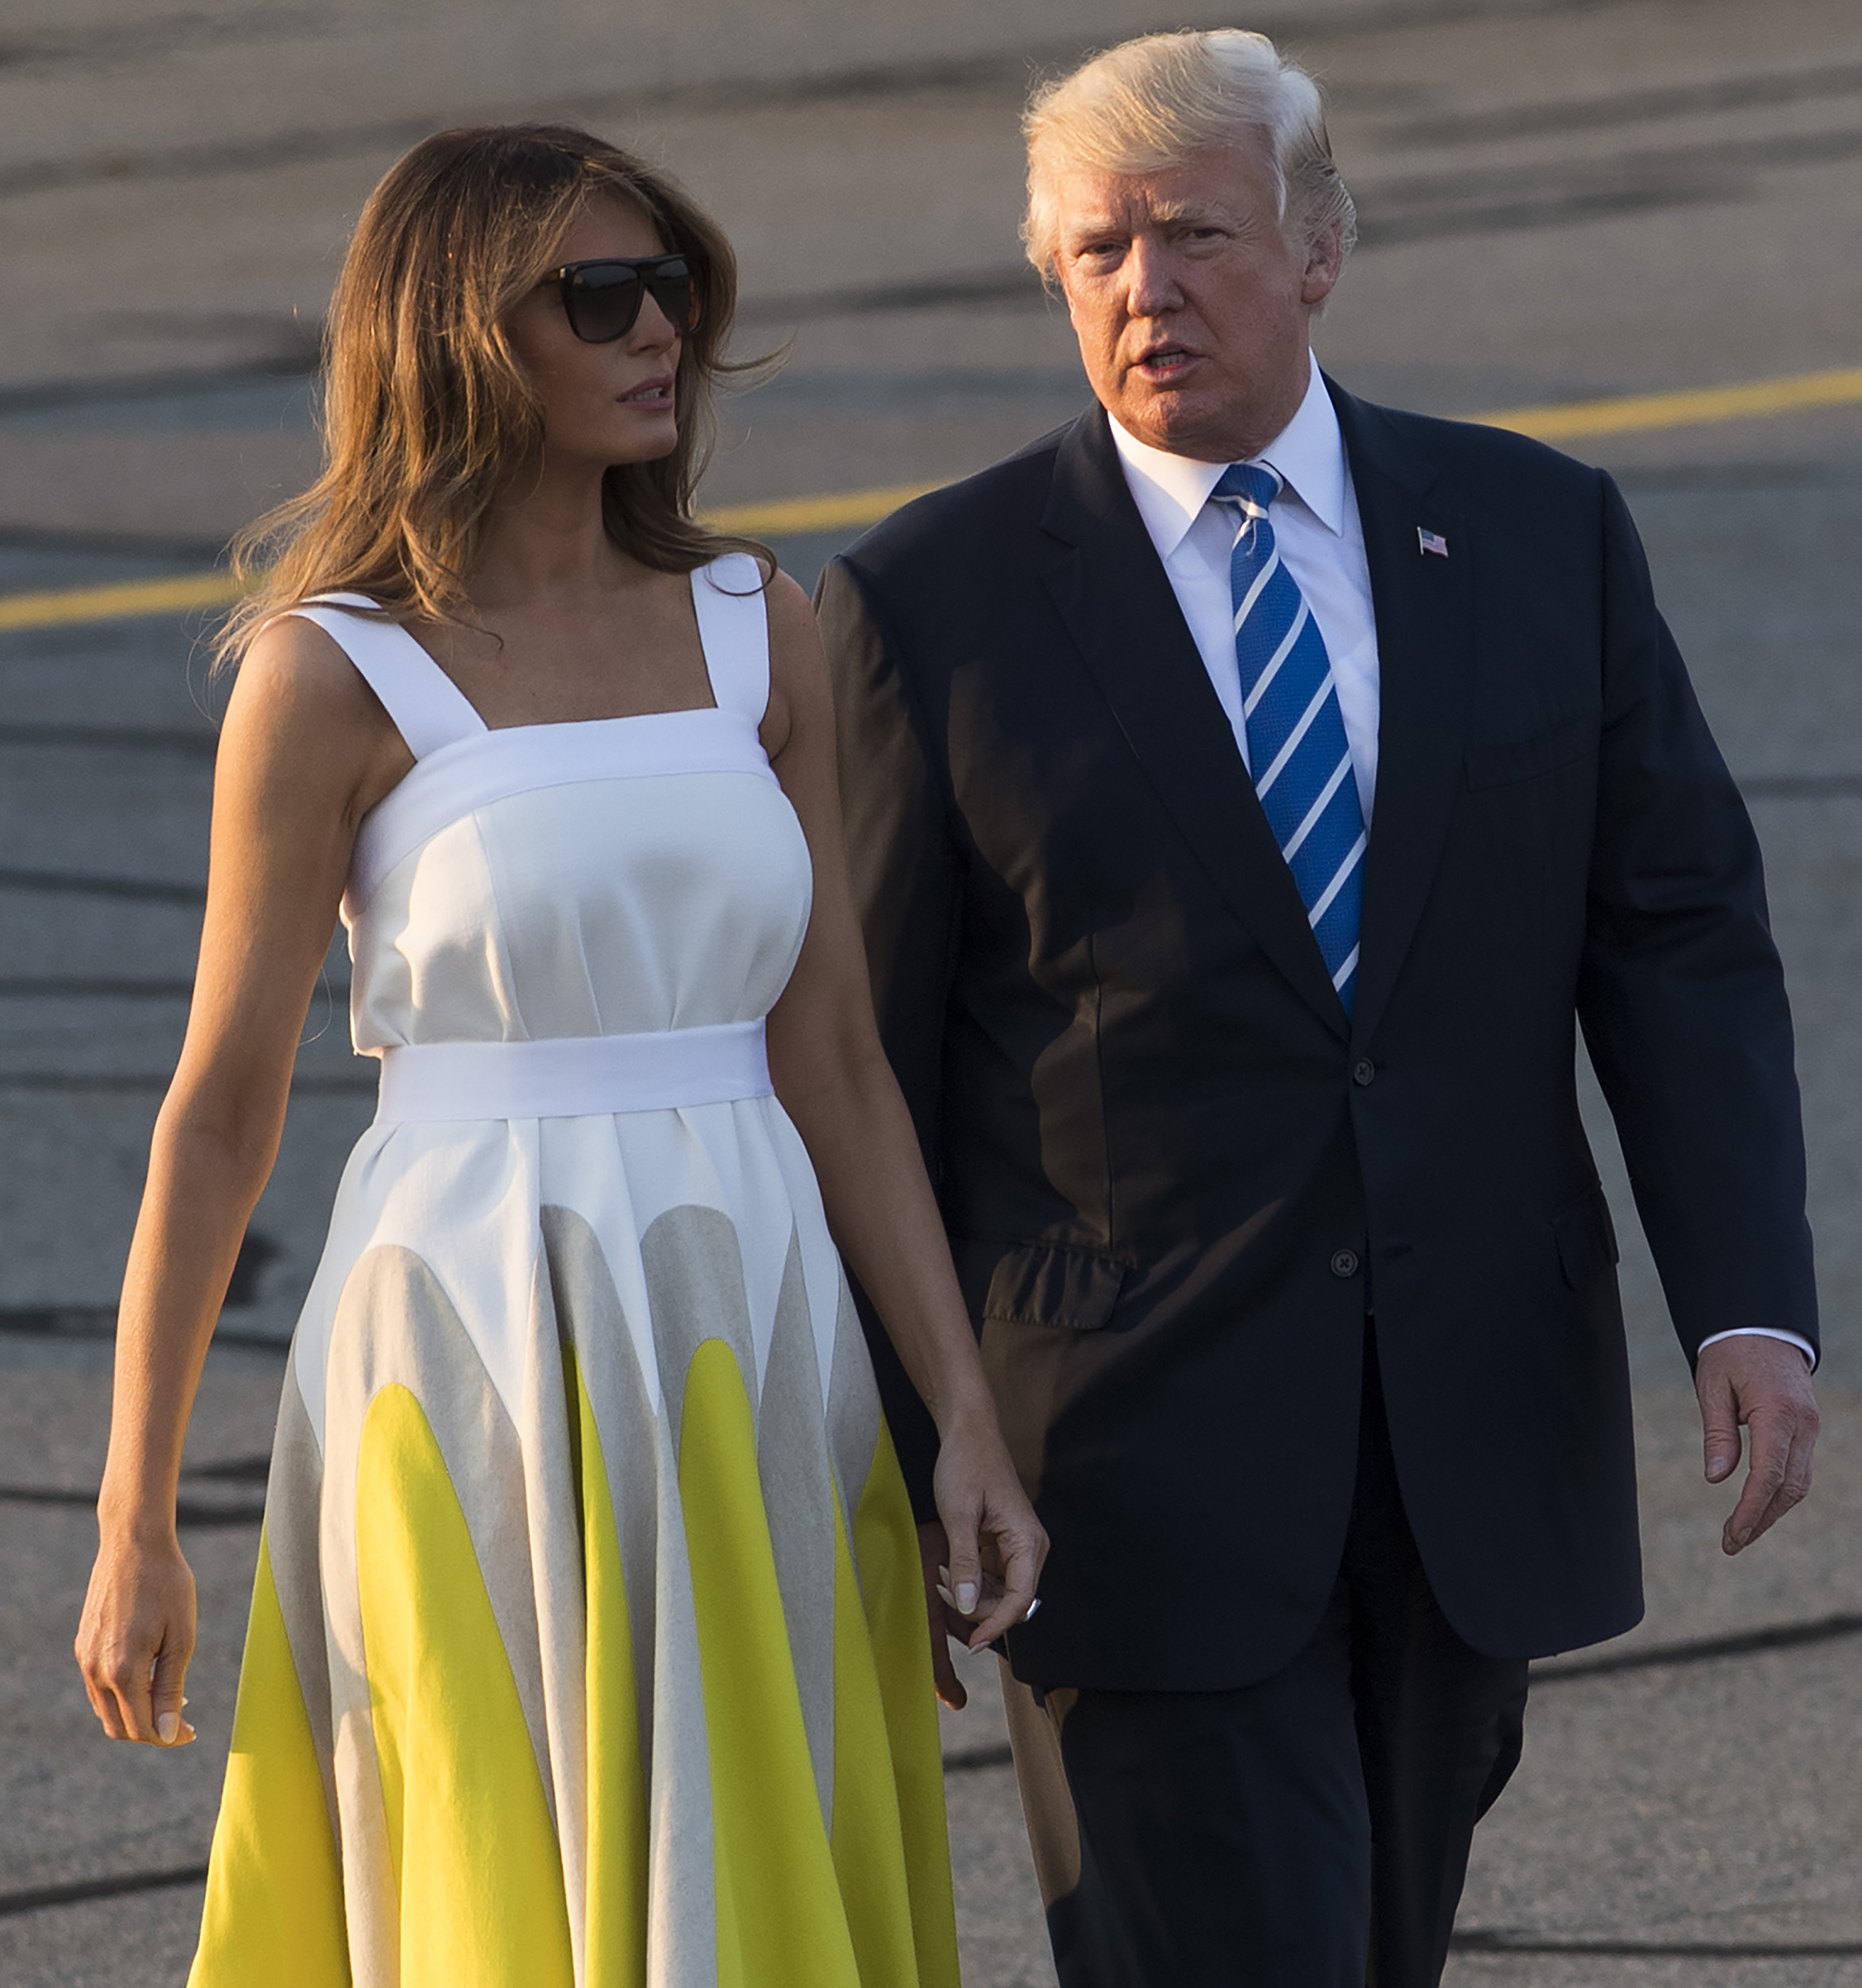 President Donald Trump and First lady Melania Trump, wearing a yellow and white Delpozo dress,  walk to board Air Force One prior to departure from Morristown Municipal Airport in New Jersey, Aug. 20, 2017.